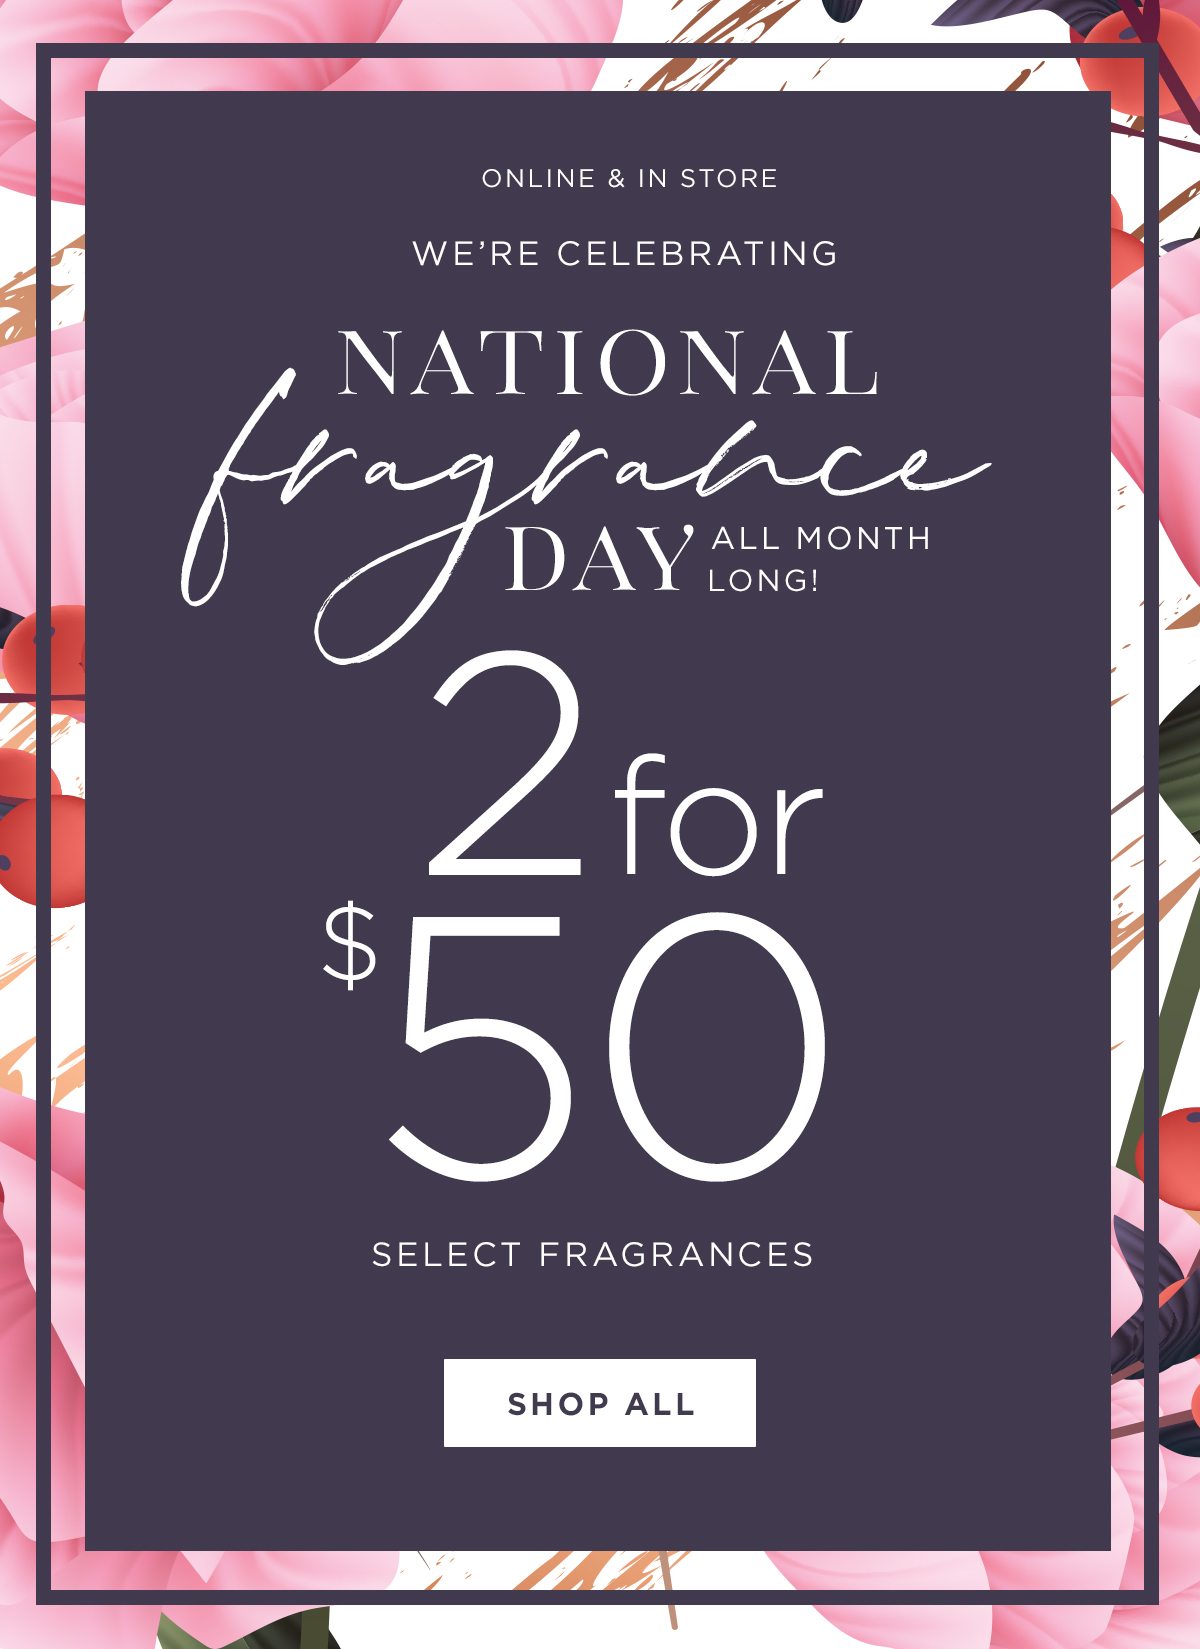 We're Celebrating National Fragrance Day All Month Long! - Online & In Store - 2 For $50 On Select Fragrances - Shop now!